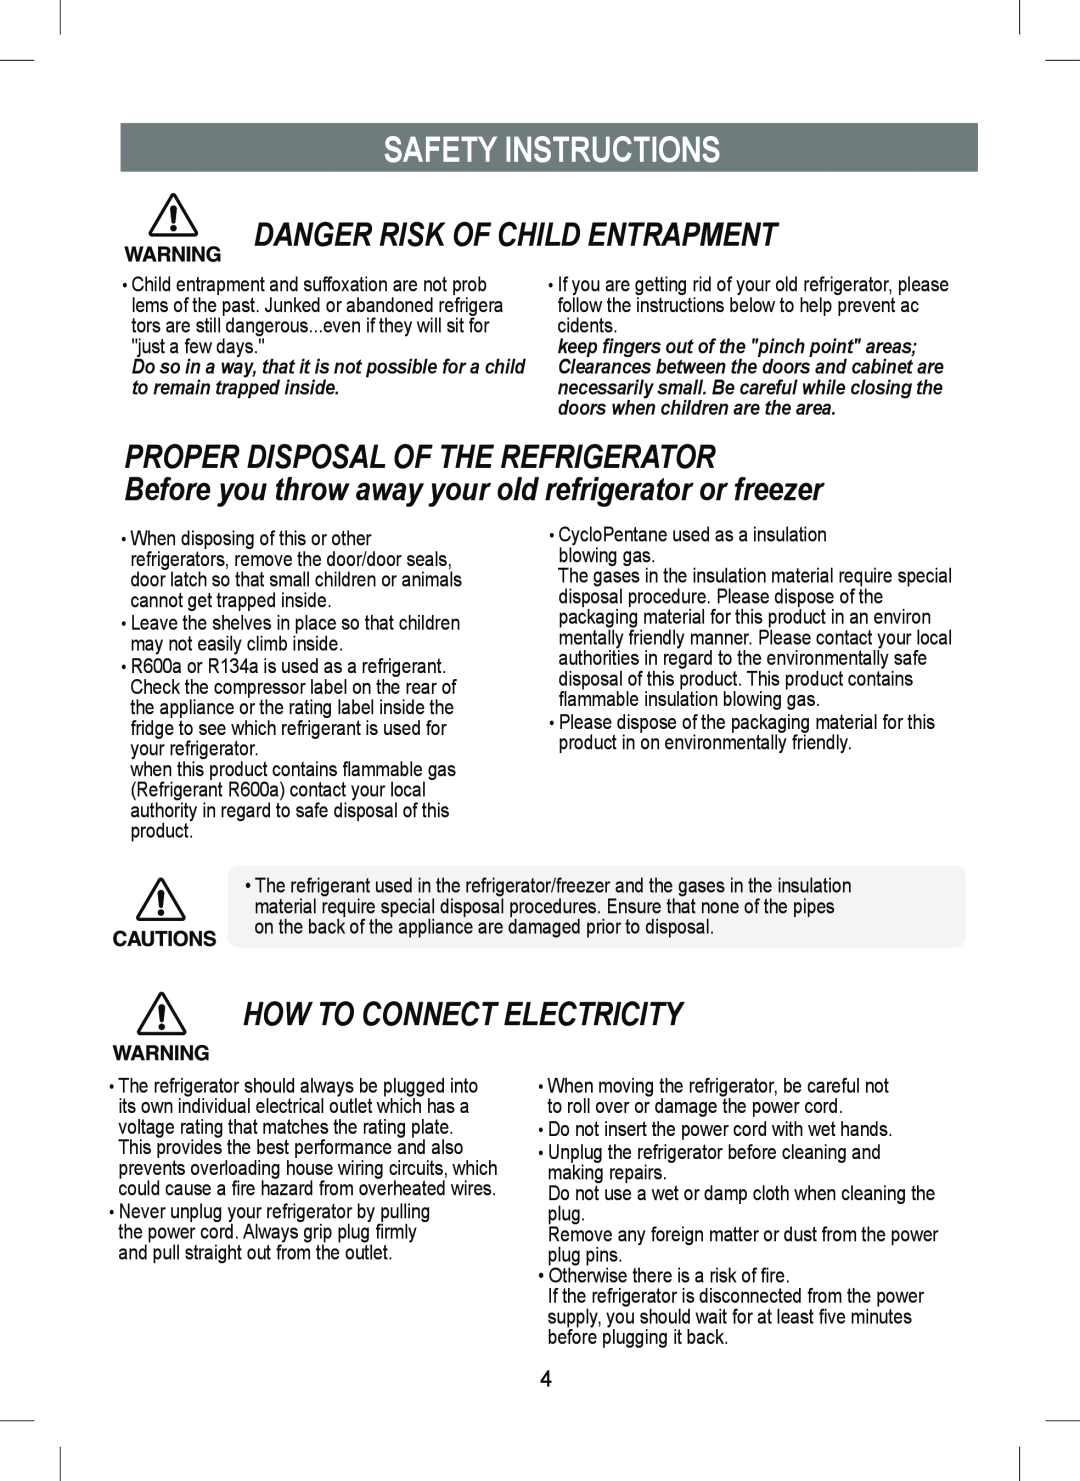 Samsung RT45M, RT41M Danger Risk Of Child Entrapment, Proper Disposal Of The Refrigerator, How To Connect Electricity 